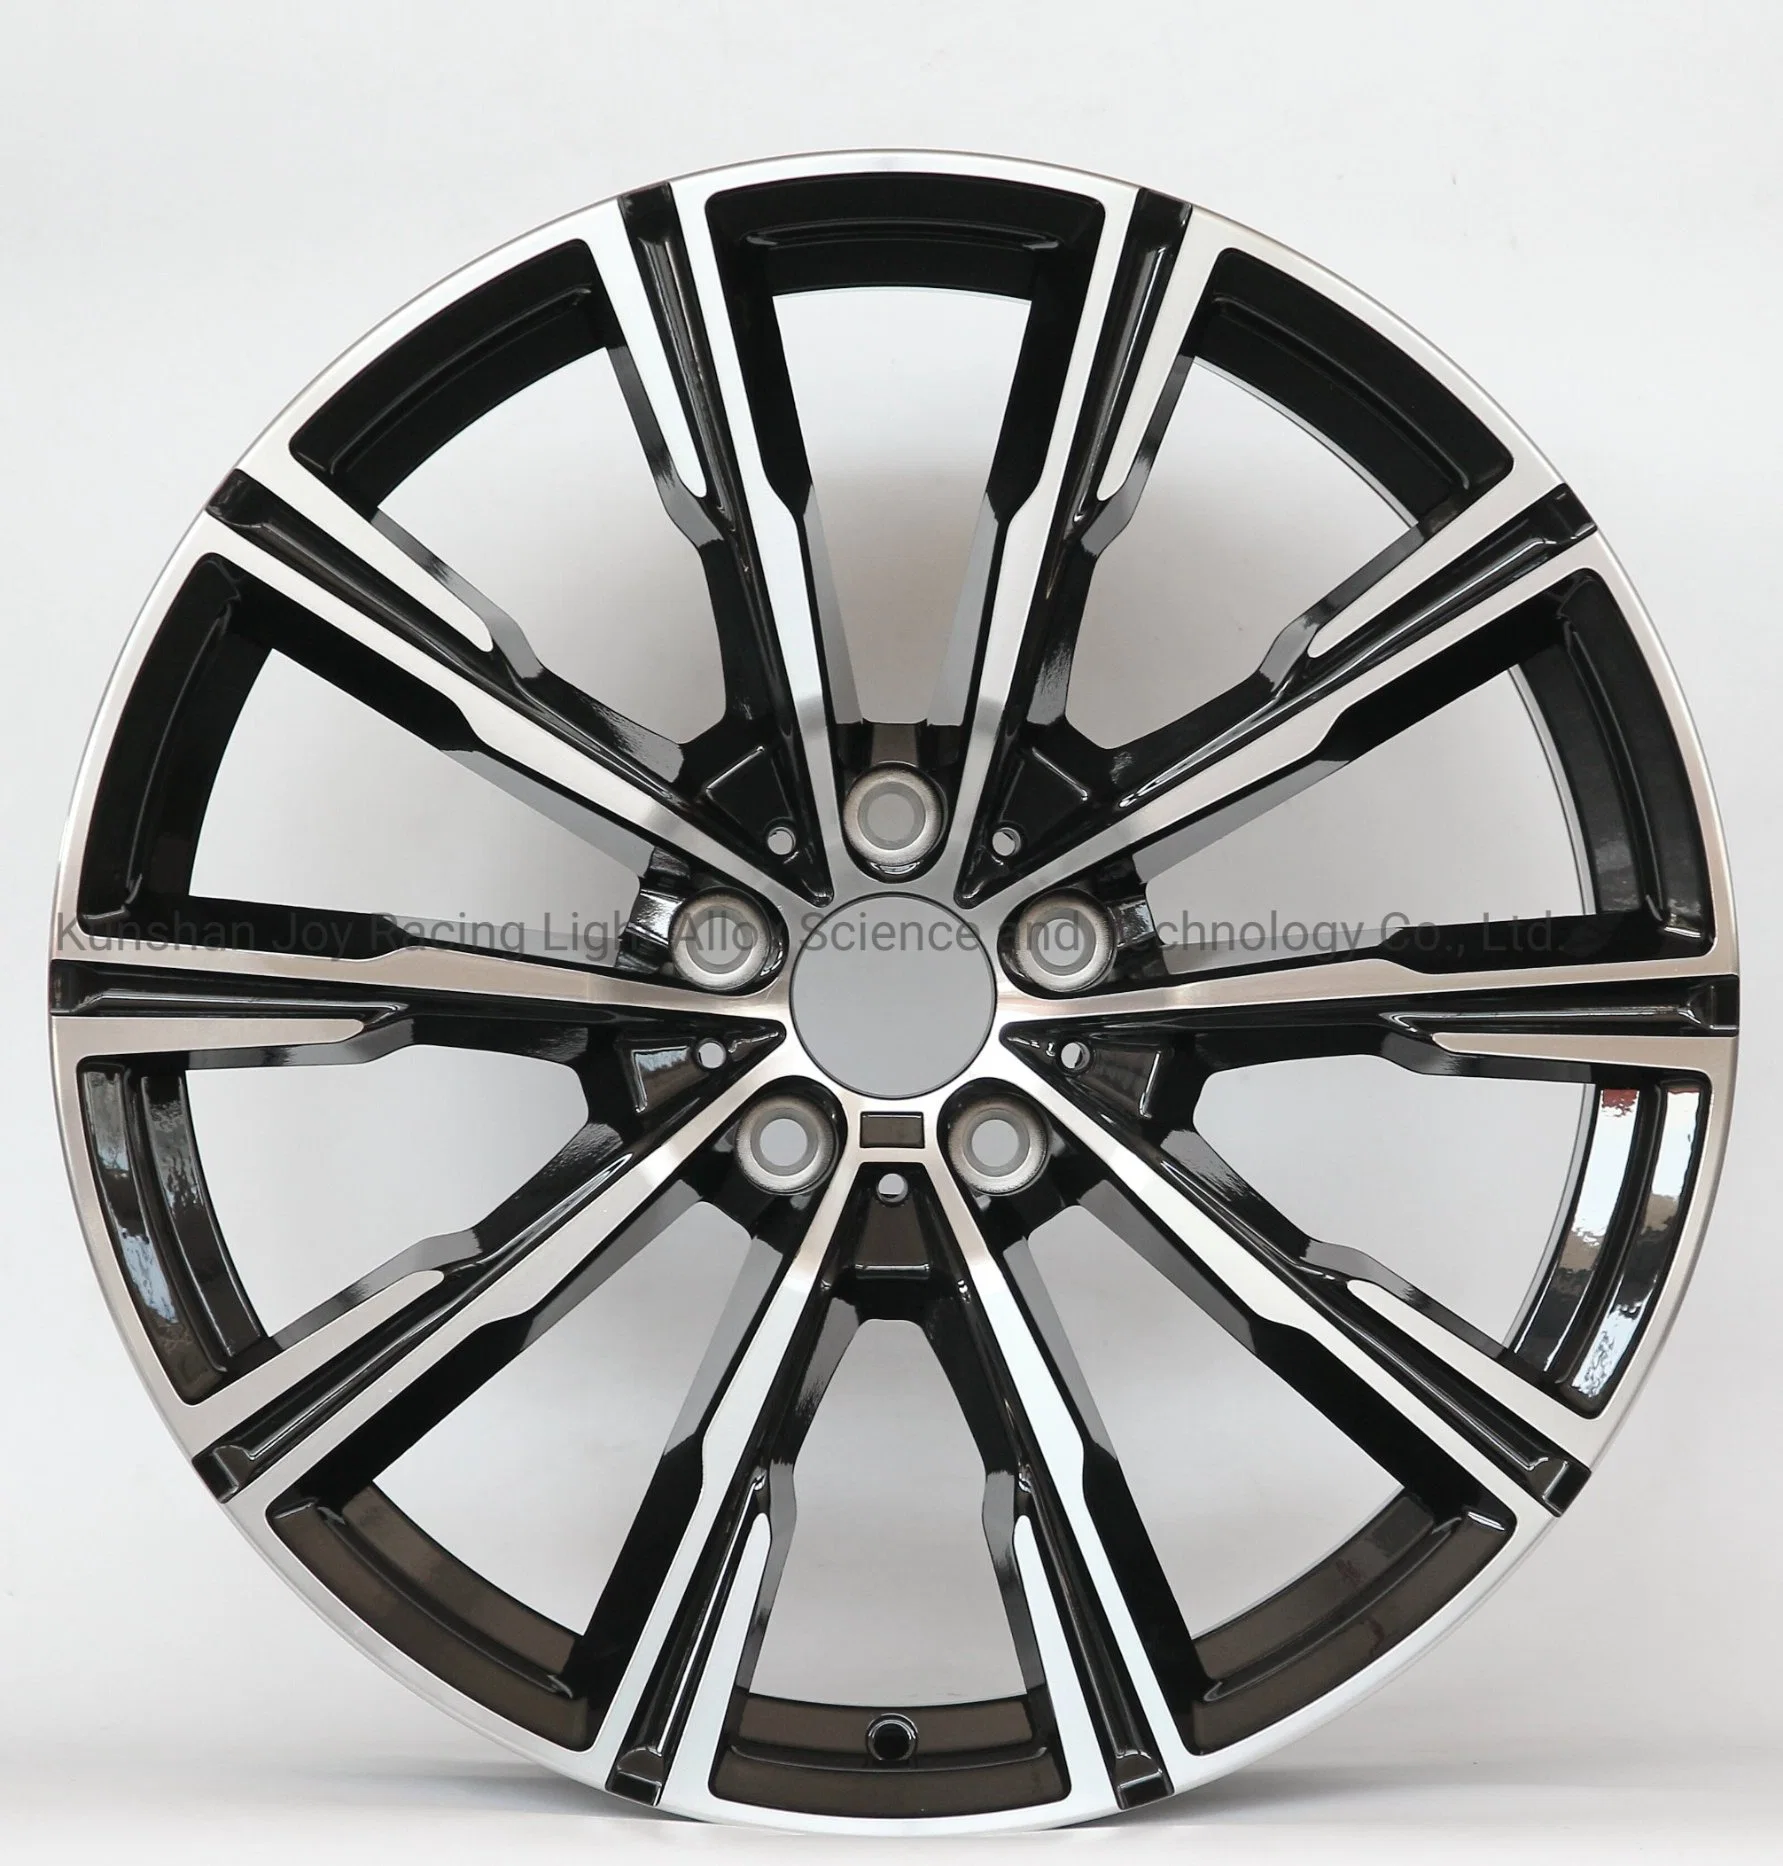 Alloy Wheel 20inch Front and Rear Wheel for Brand Car